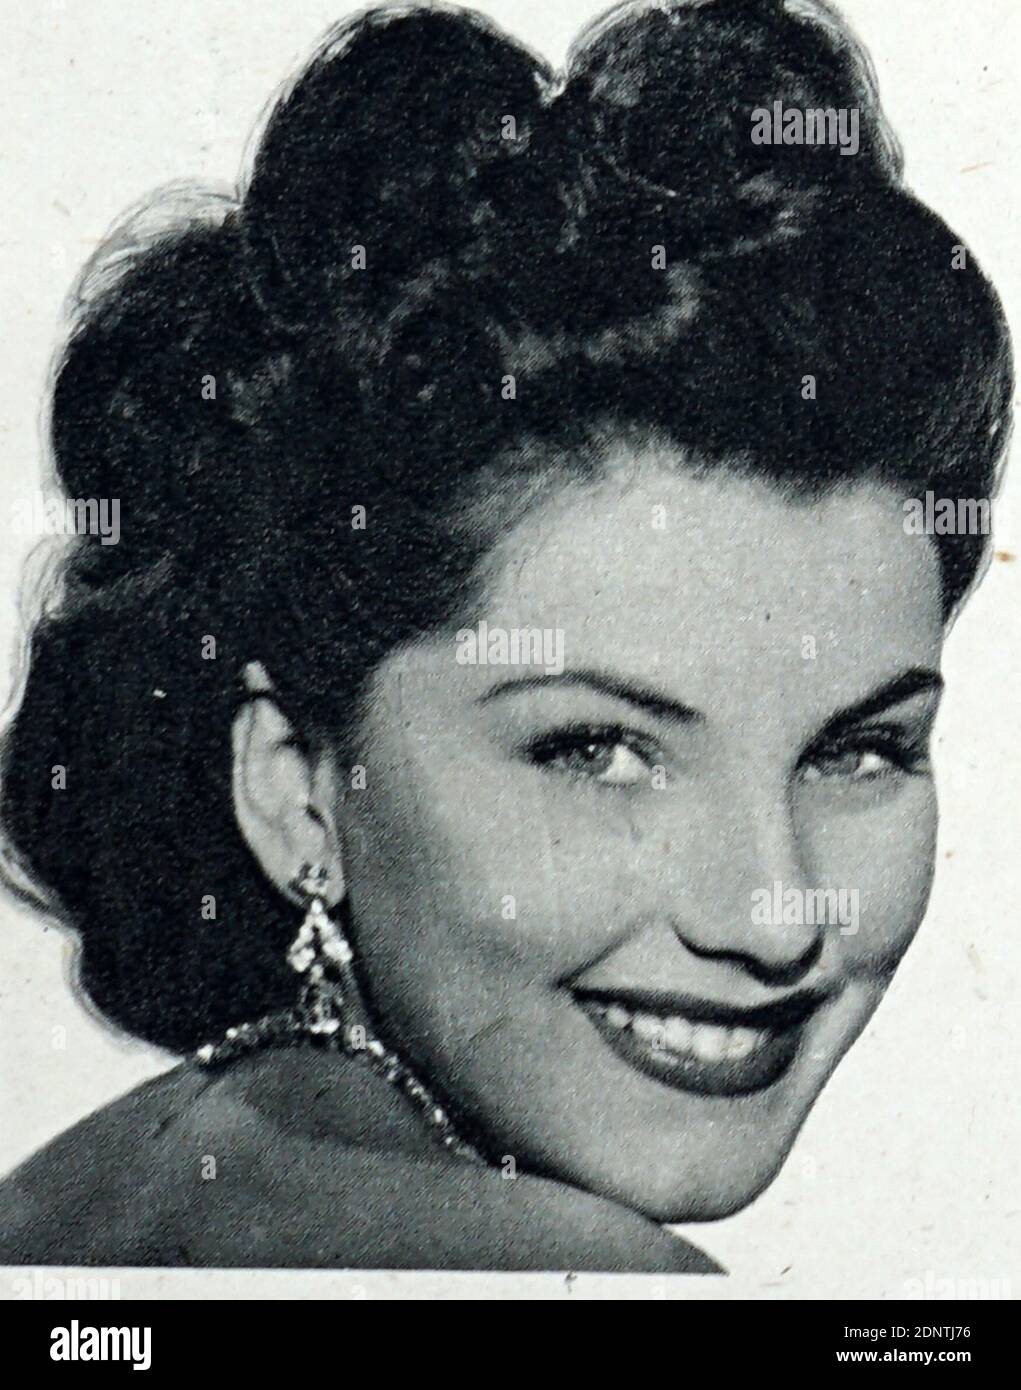 Photograph of Debra Paget (1933-) an American actress and entertainer. Stock Photo